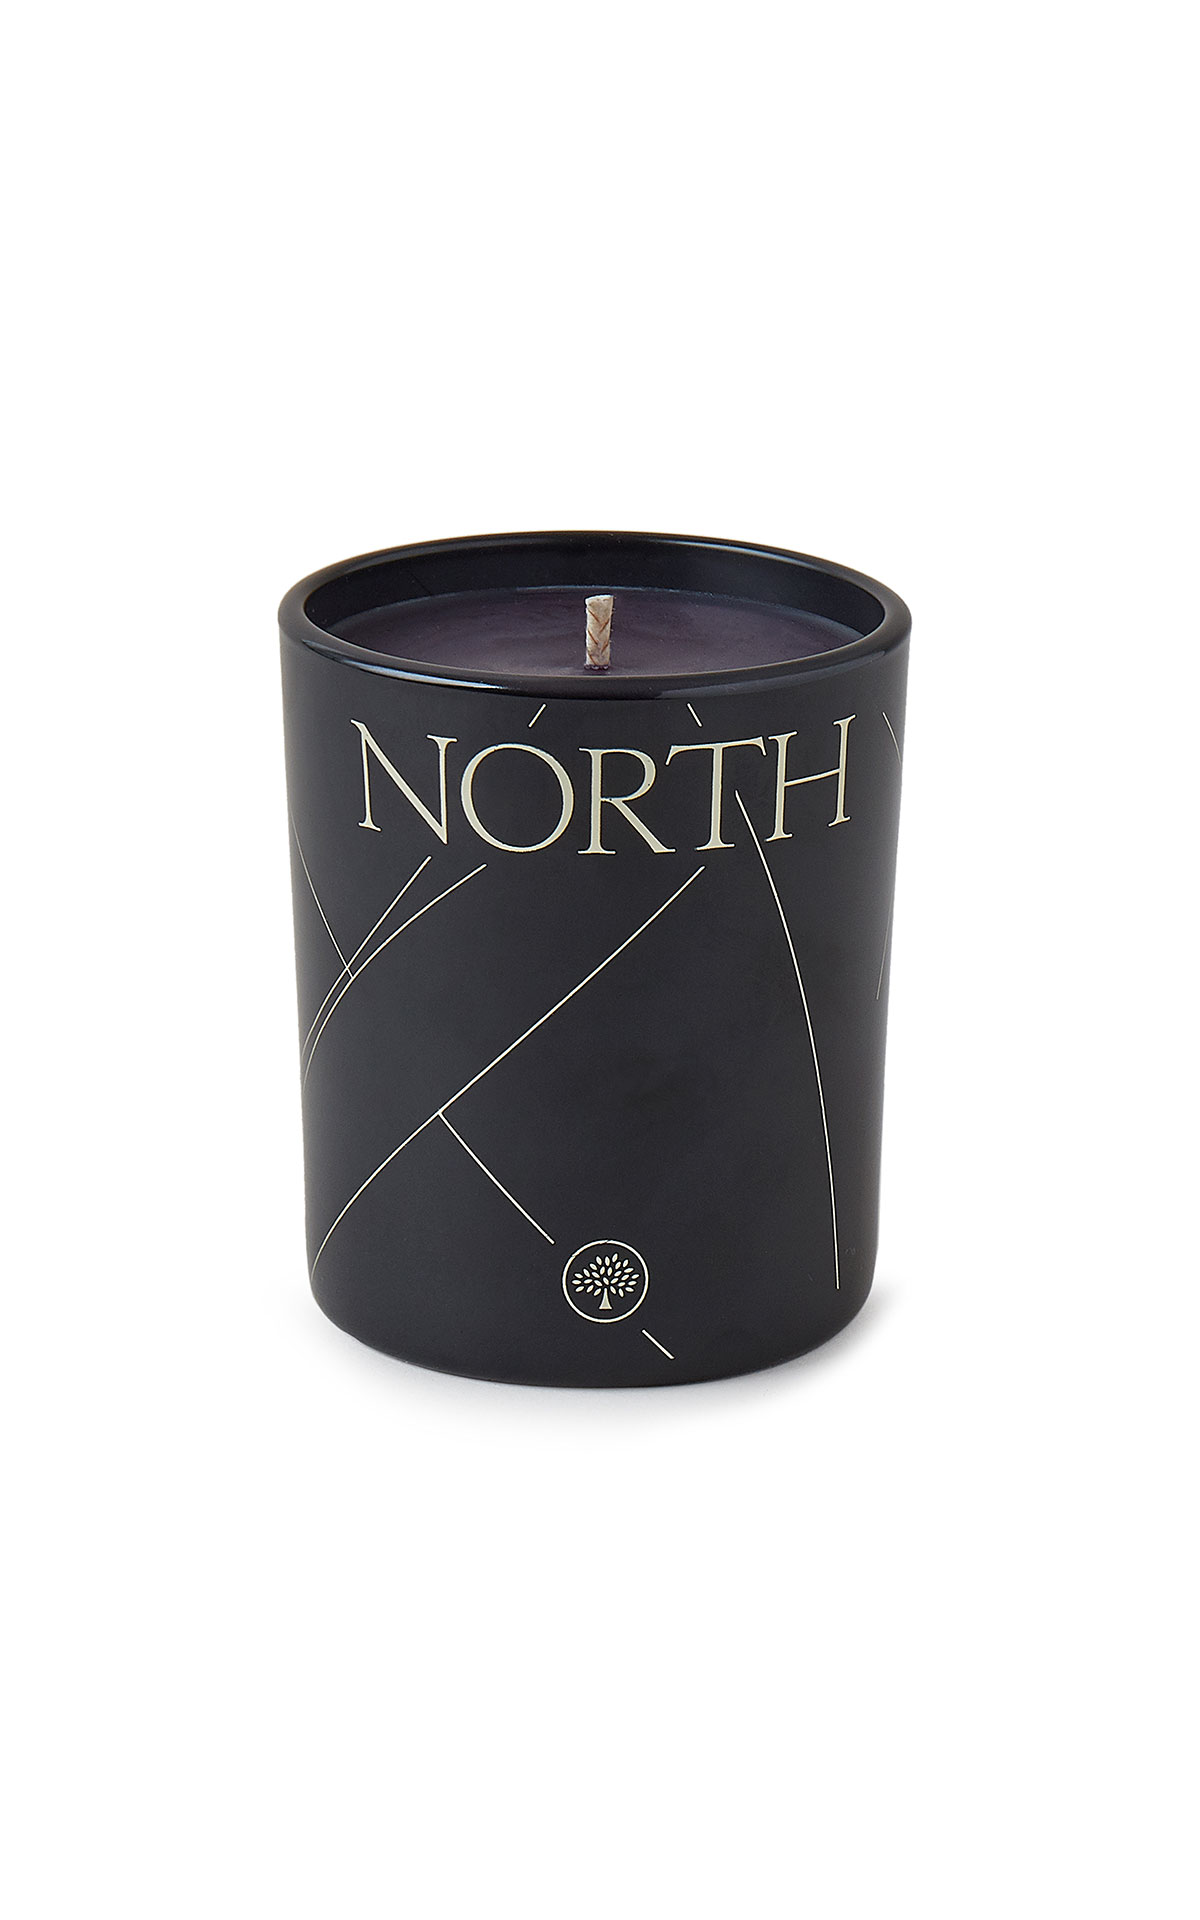 Mulberry North candle from Bicester Village